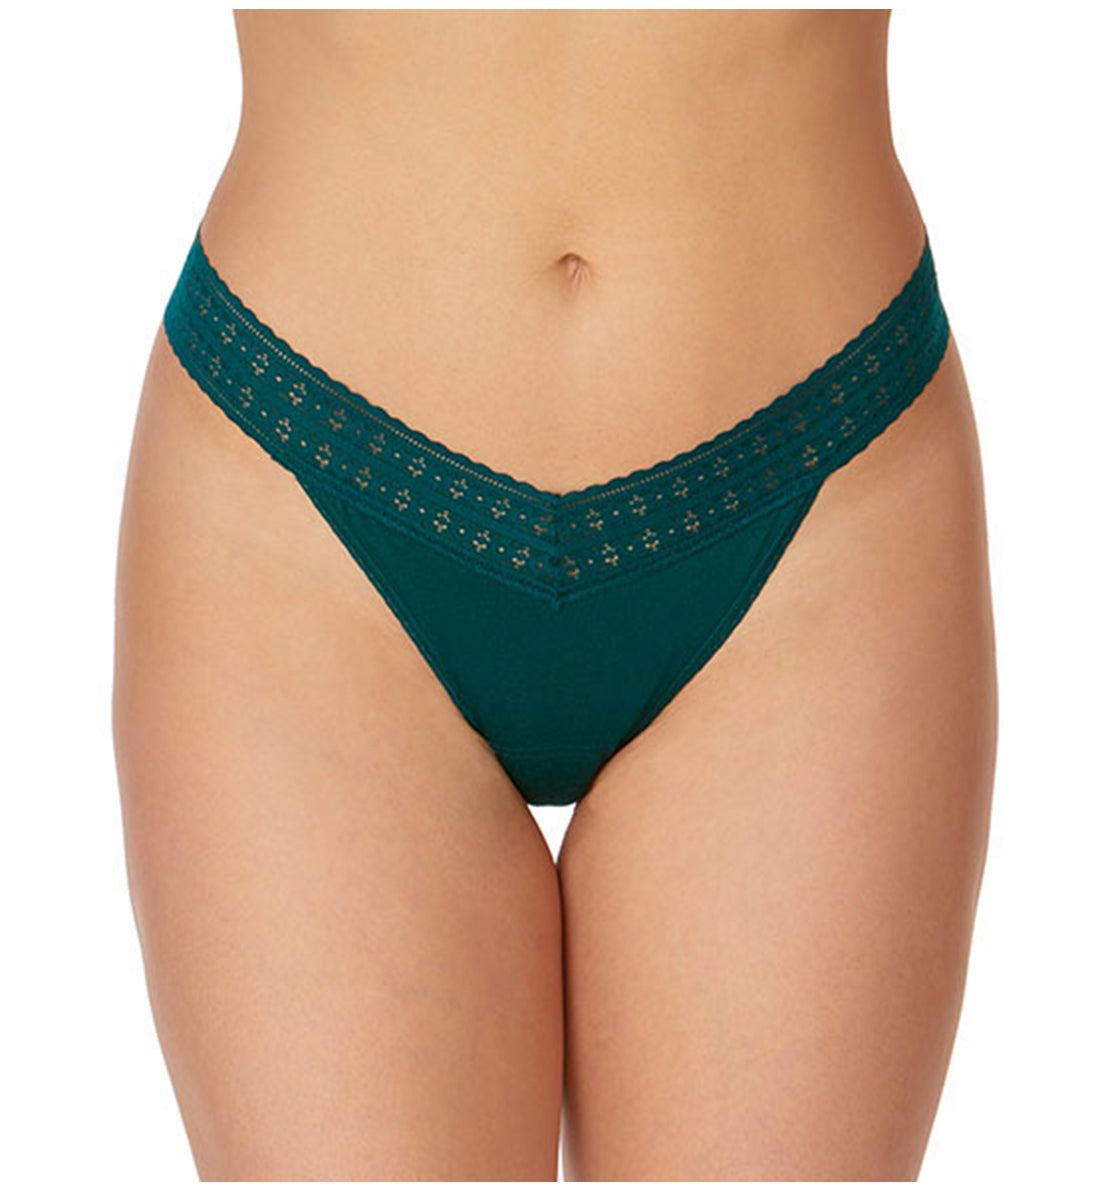 Hanky Panky Dream Original Rise Thong (631104),Ivy - Ivy,One Size